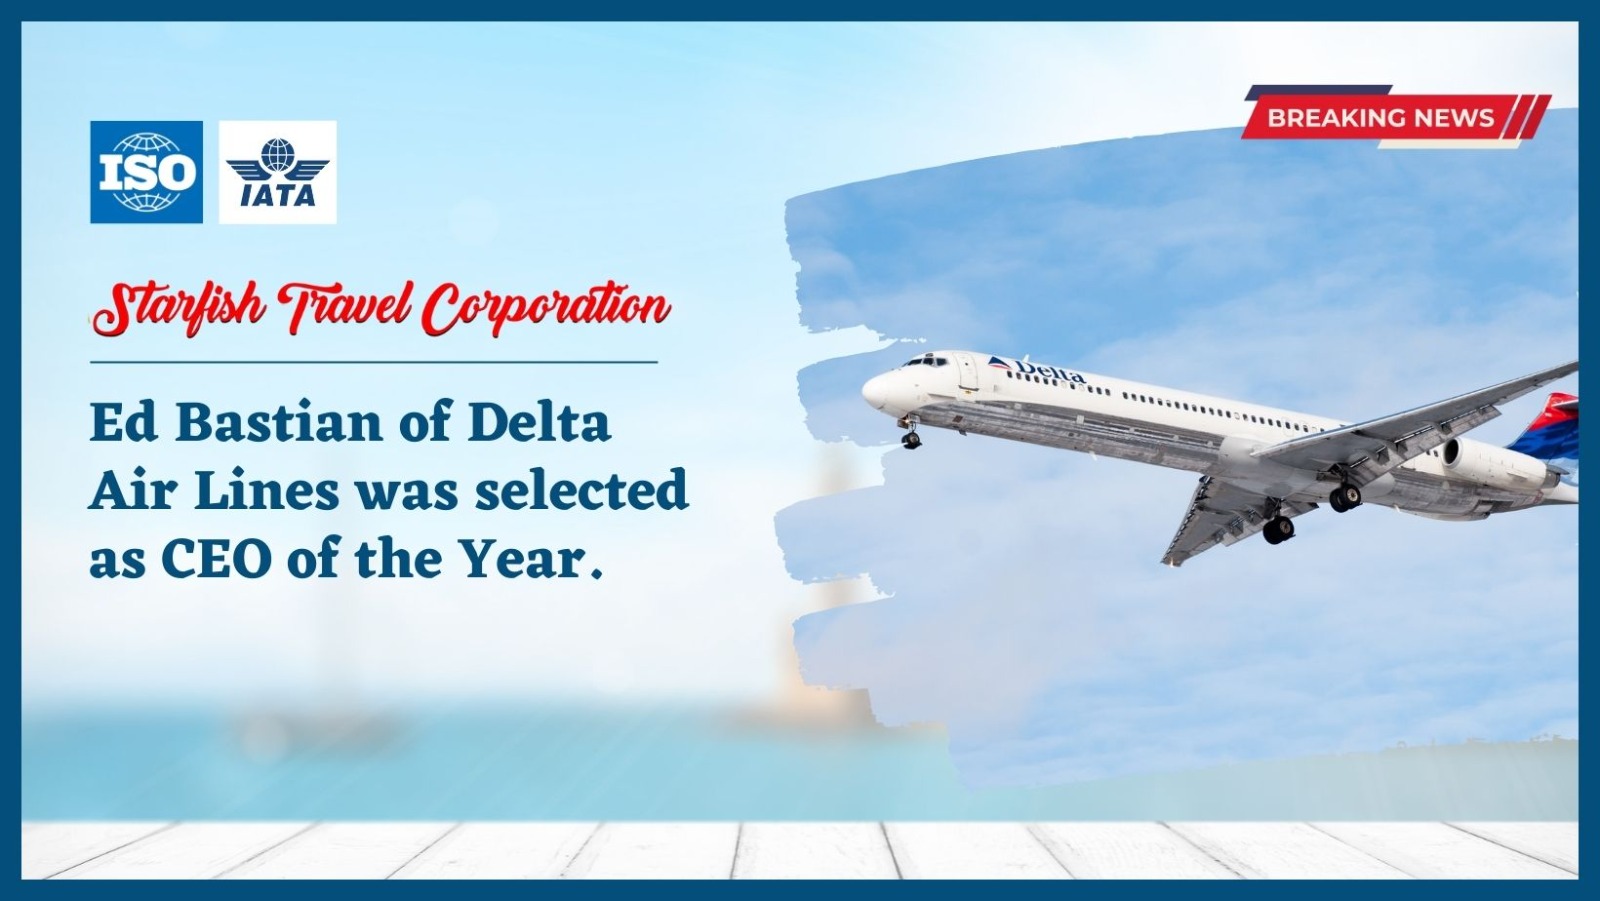 Ed Bastian of Delta Air Lines was selected as CEO of the Year.